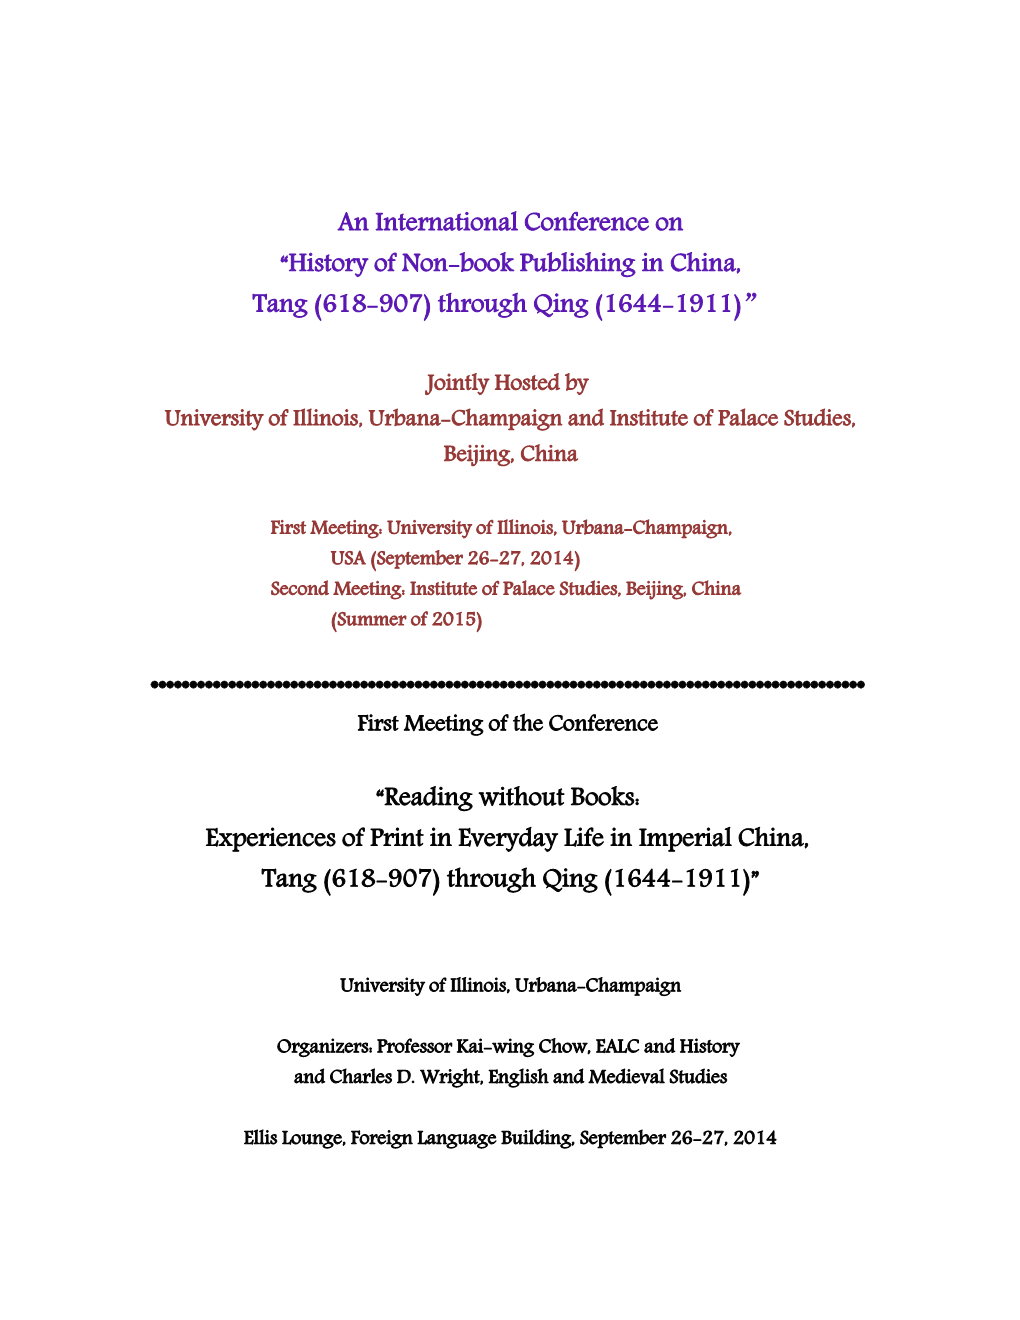 History of Non-Book Publishing in China